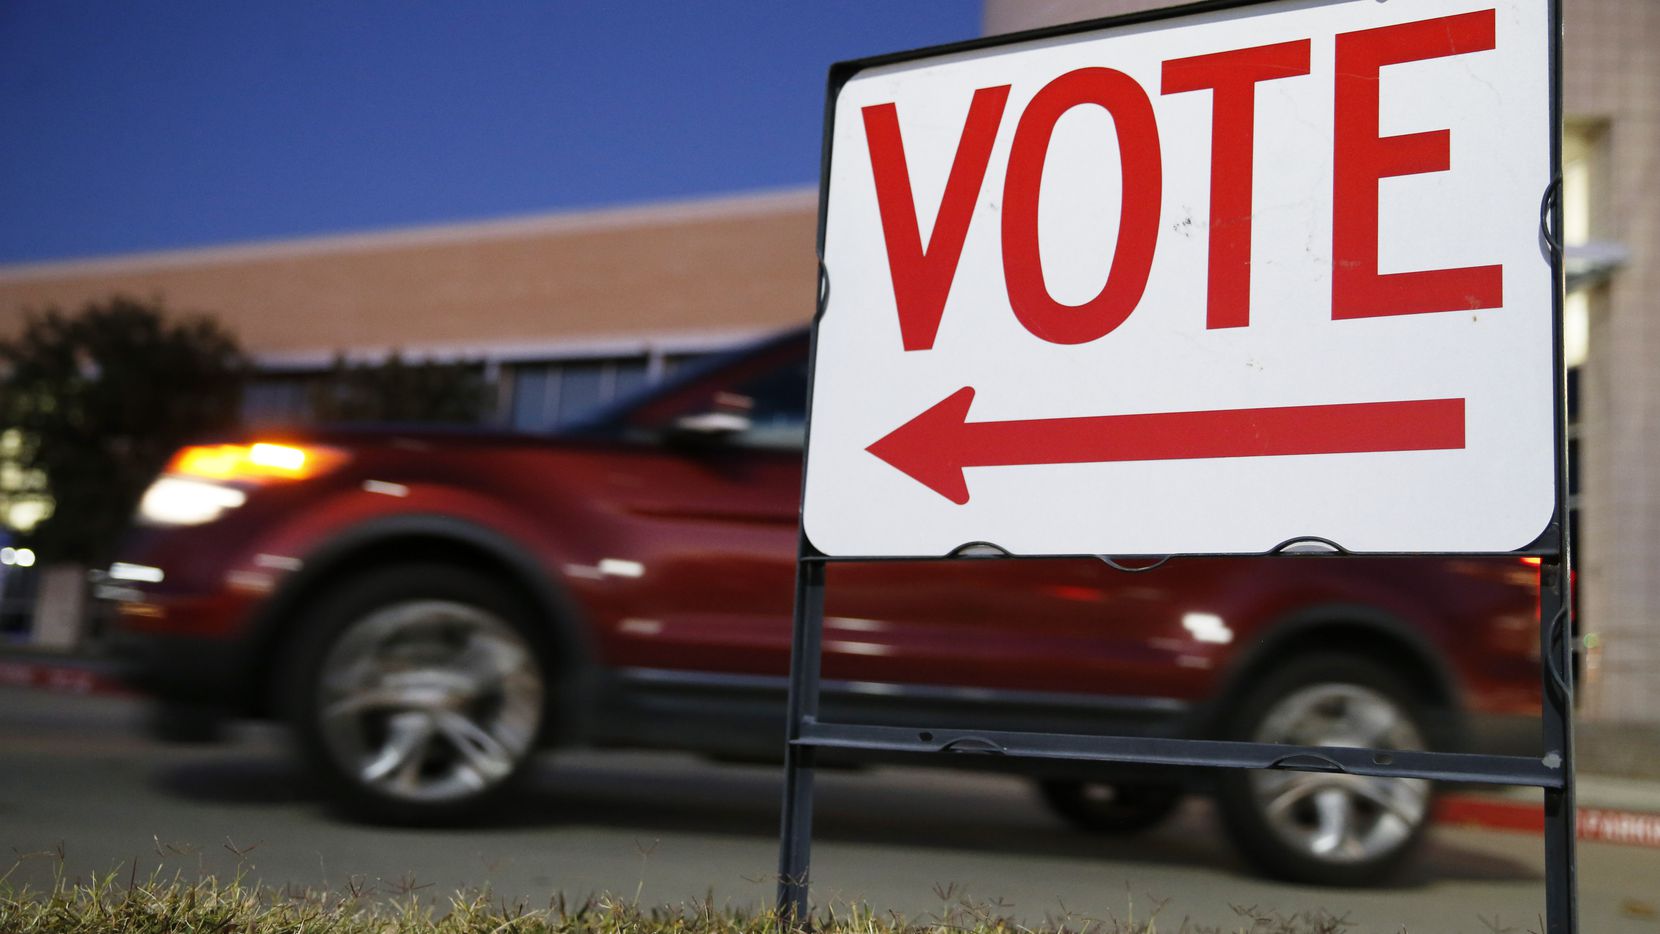 A sign directing people to a voting location is pictured in this file photo.